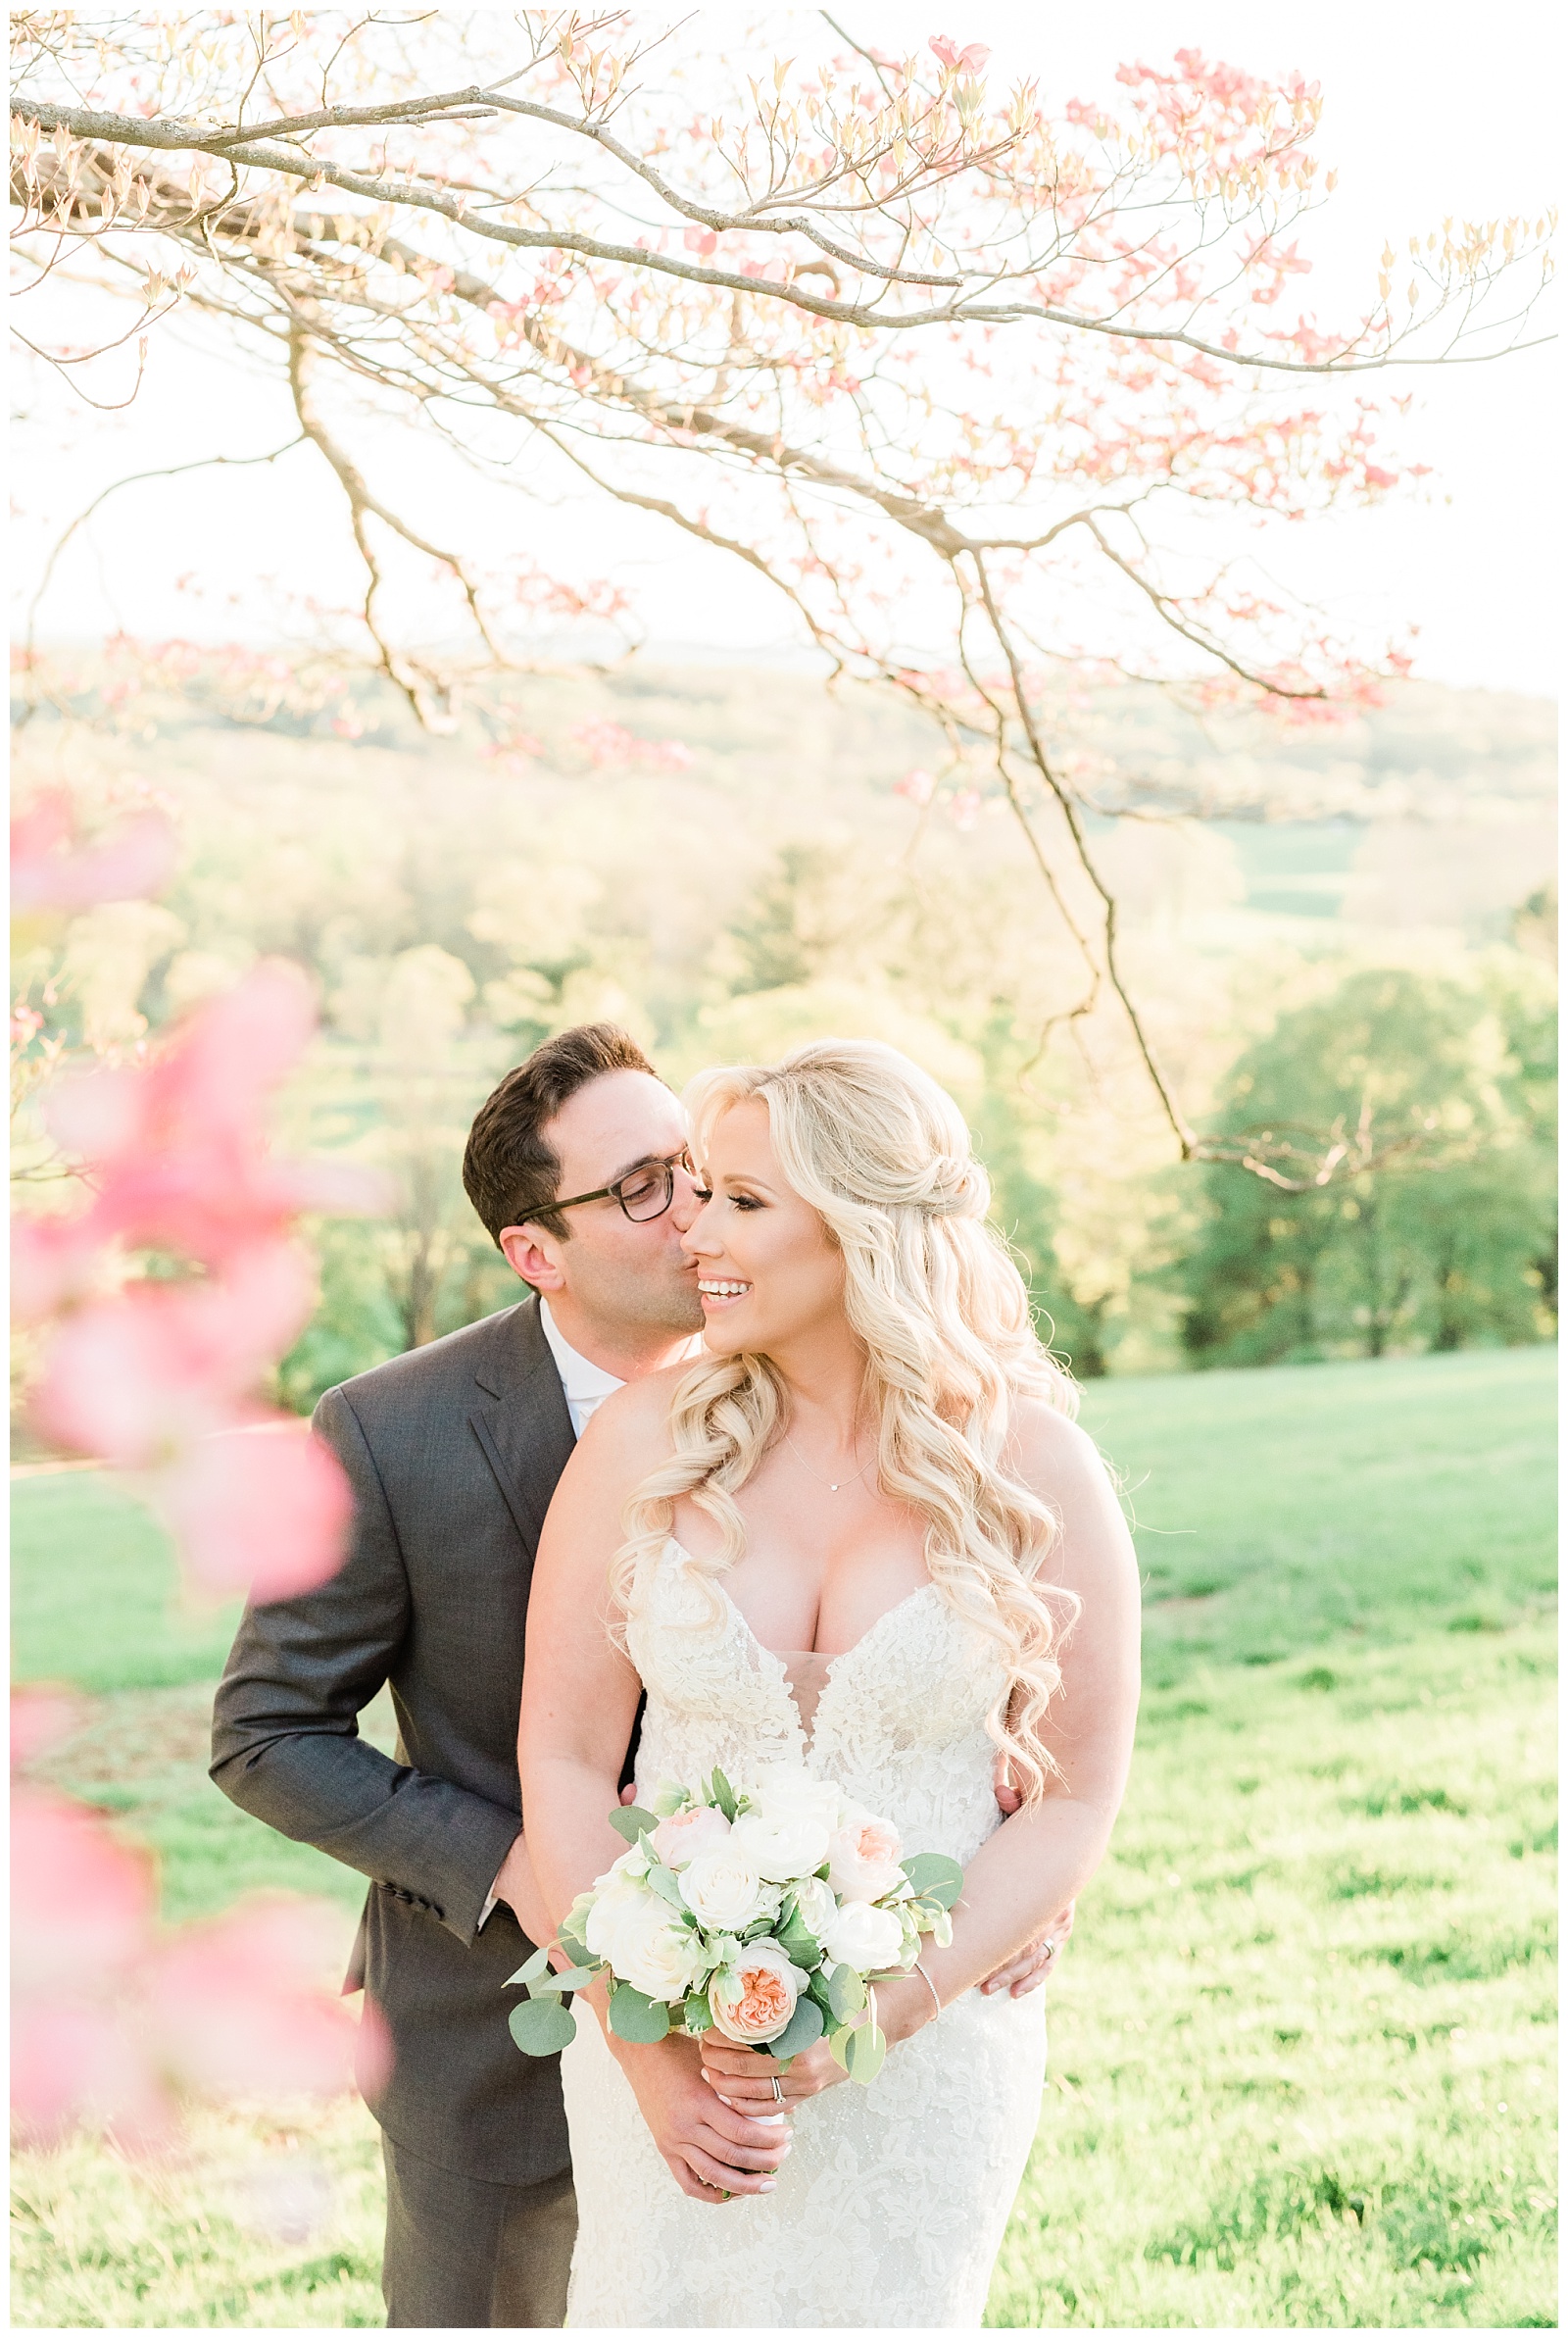 A groom kisses his bride on the cheek at golden hour underneath a pink dogwood tree.